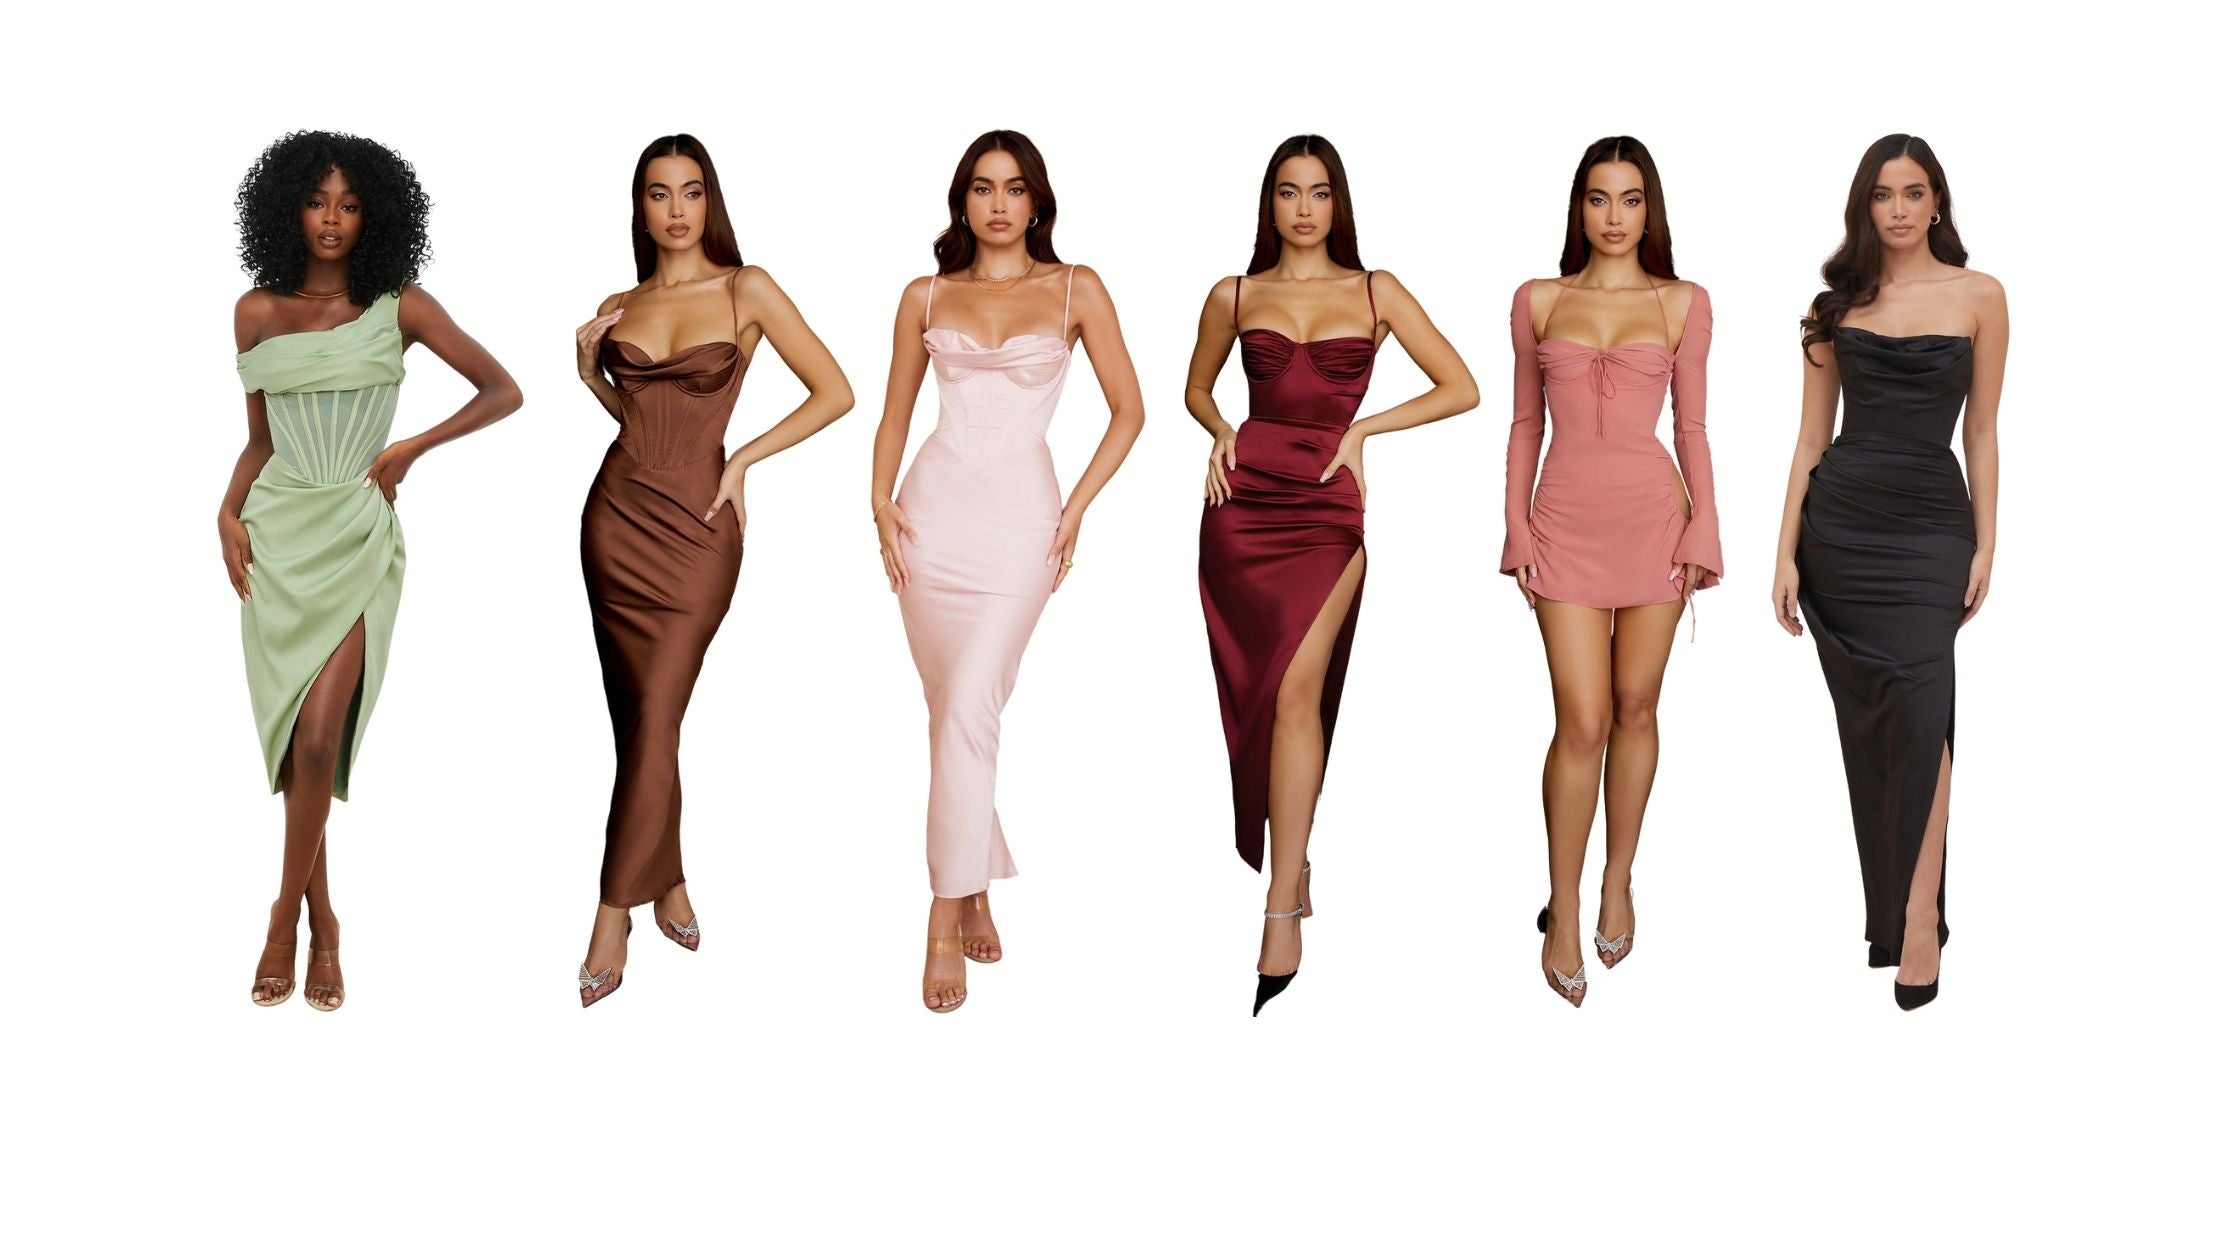 Meet The New House Of CB Dresses For Hire